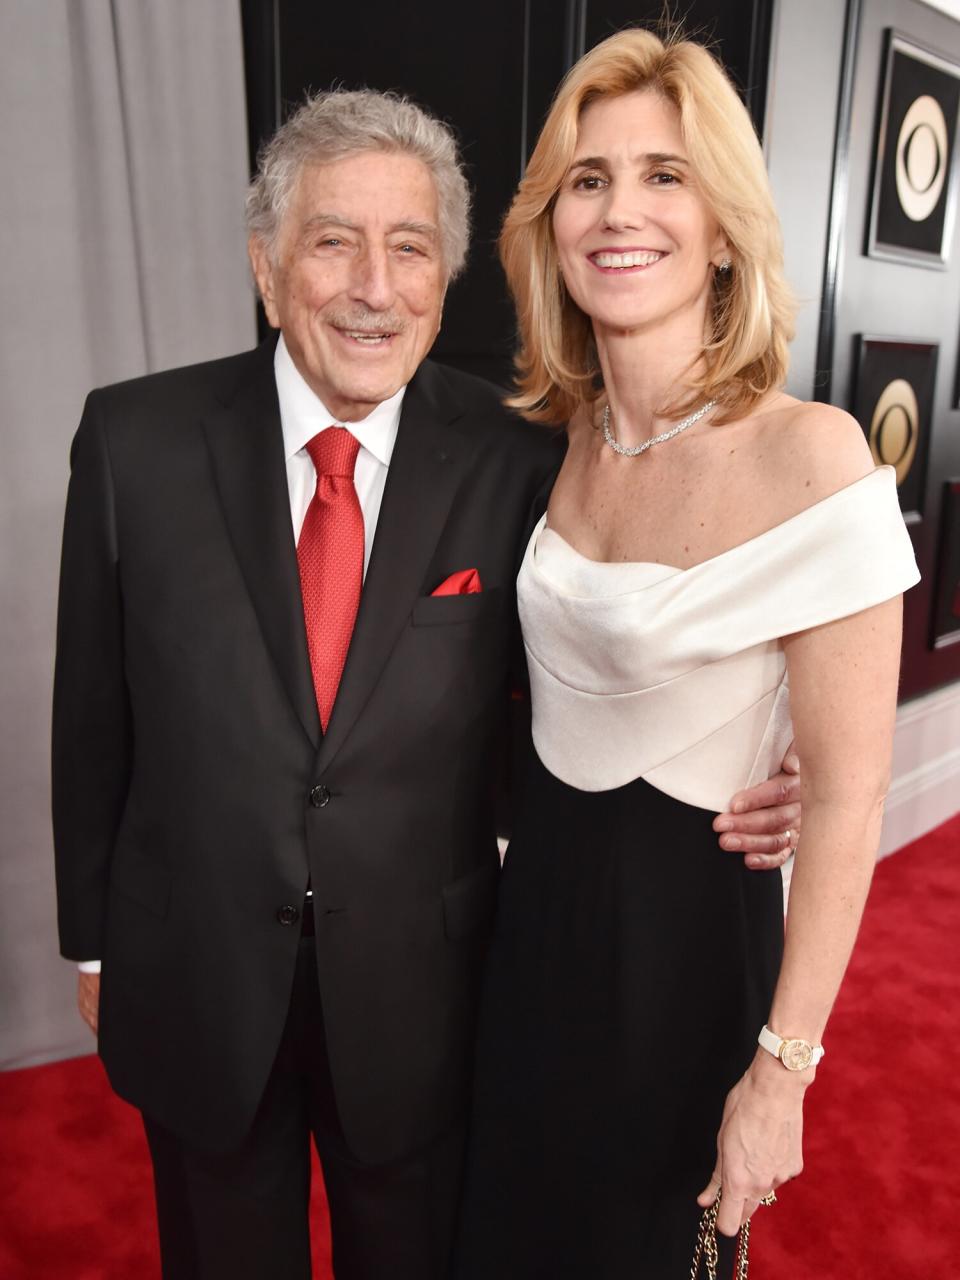 Tony Bennett and Susan Crow attend the 60th Annual GRAMMY Awards at Madison Square Garden on January 28, 2018 in New York City